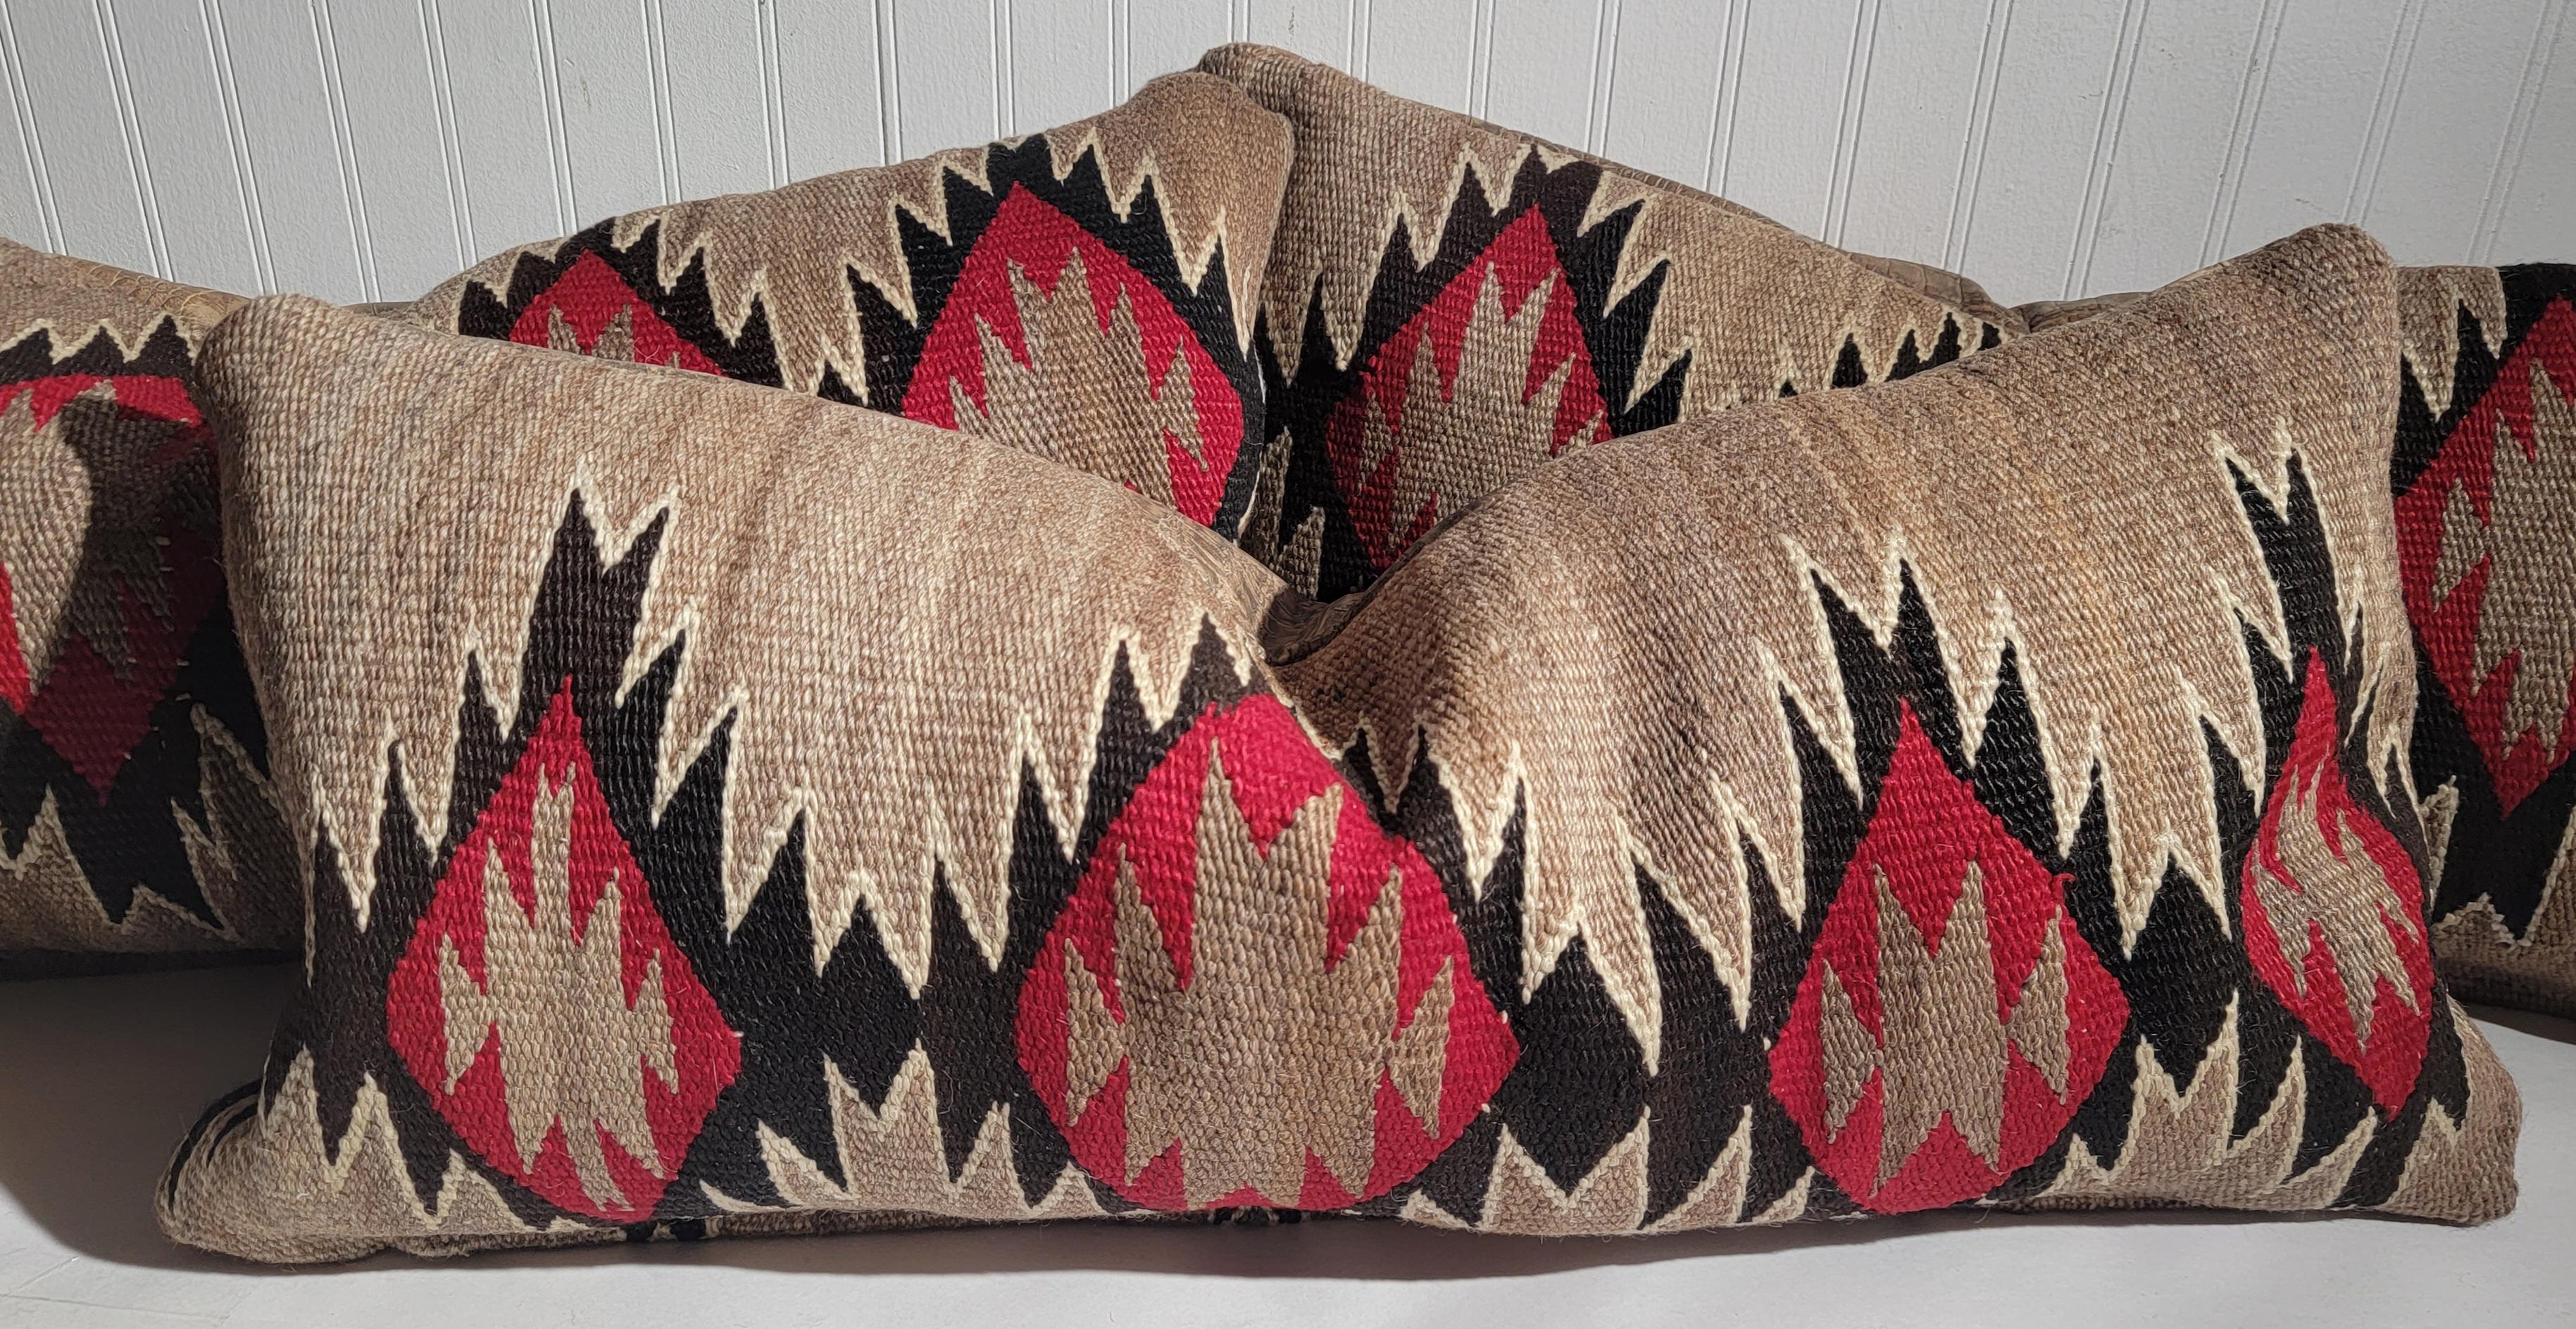 19Thc Navajo Indian weaving bolster pillow with alligator print leather backing. The filling is down & feather fill. These are sold individually.

Largest pillow measures - 31 x 14
both smaller pillows measure - 30 x 12

Each pillow is priced - $975